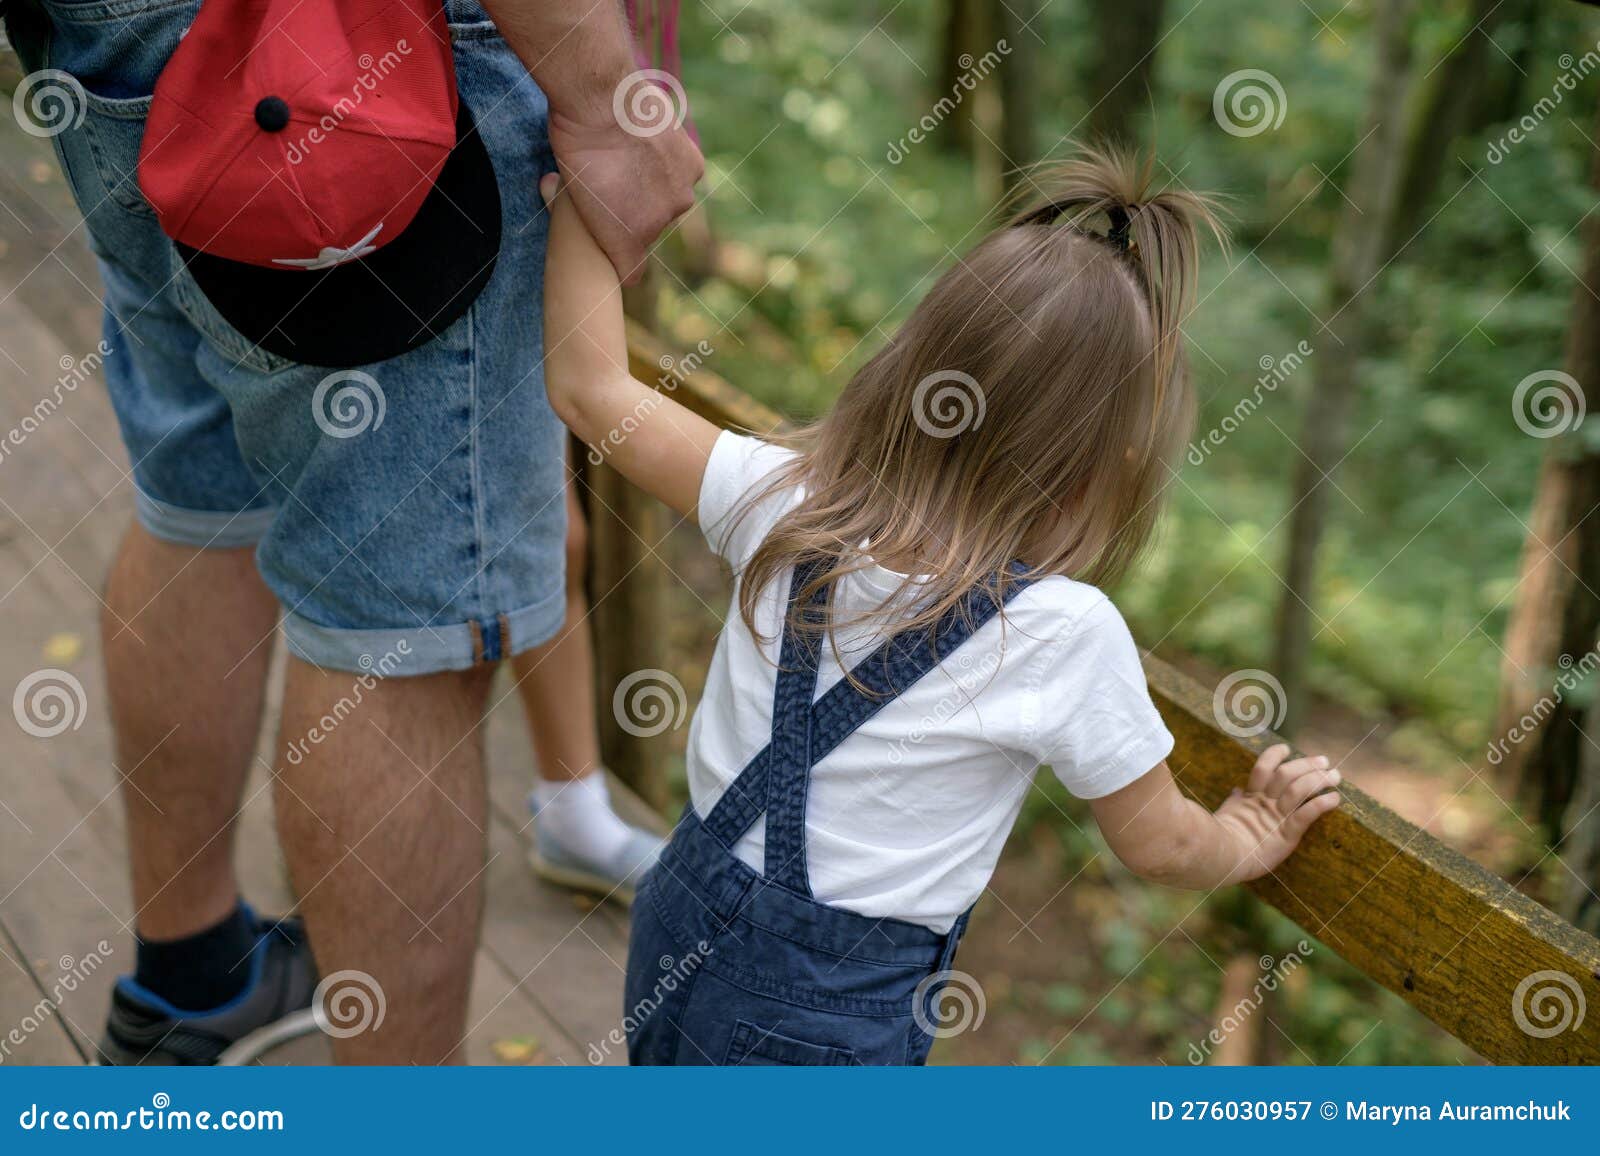 Dad Holds Little Daughter Tightly By Hand While Walking Through The Forests Stock Image Image